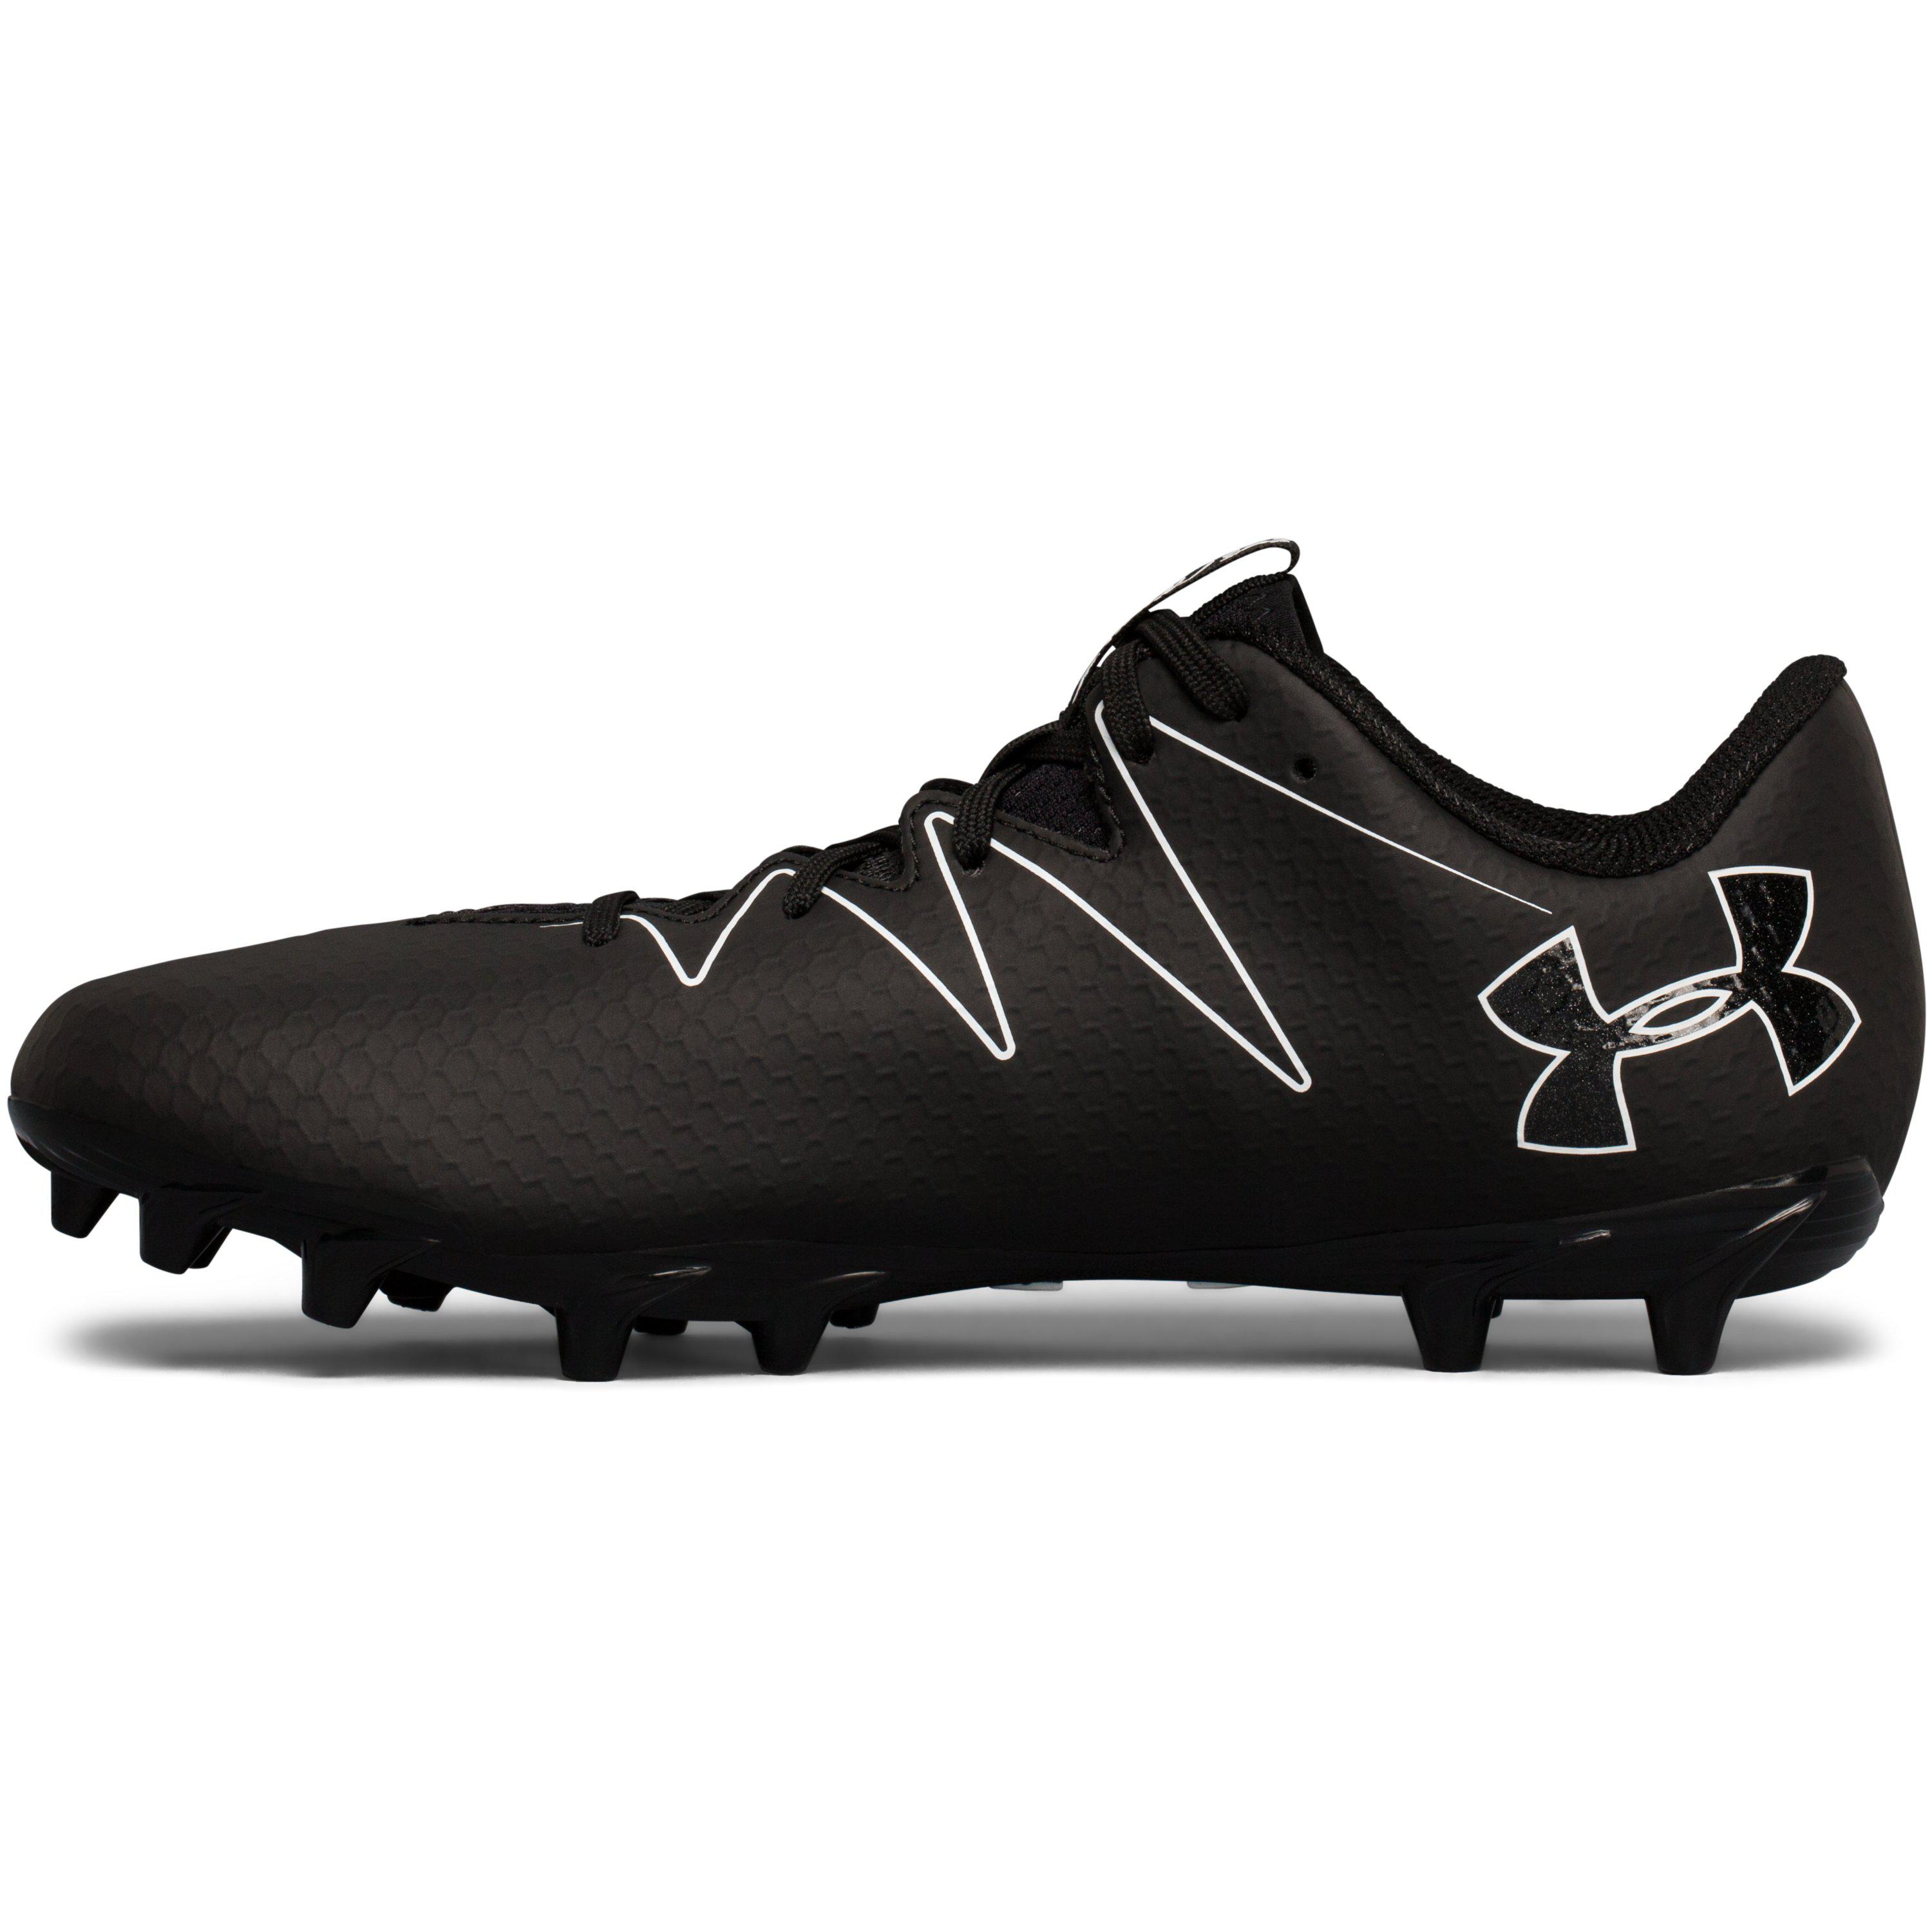 Under Armour Team Nitro Select Low MC Football Cleats AS381 3019992-102 